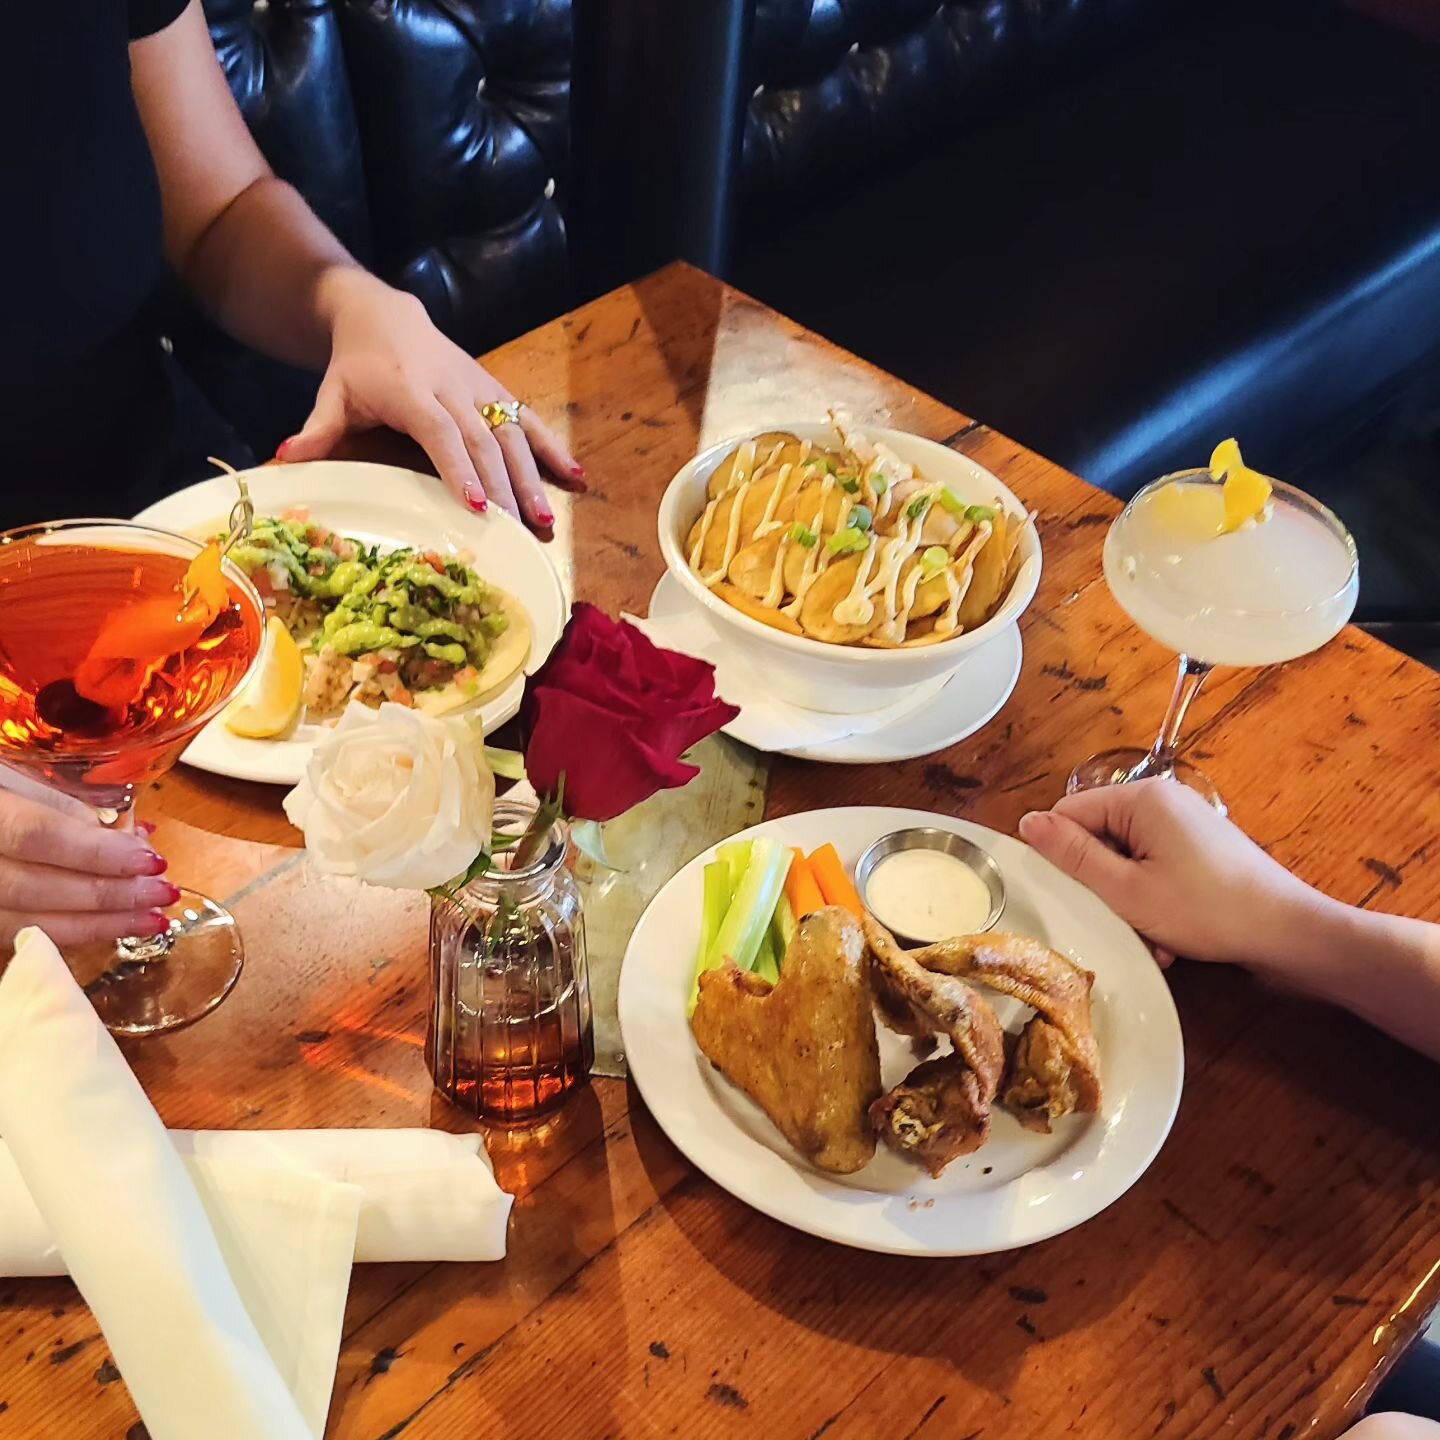 This week just got happier! 🤩 Happy hour is here, 3-5pm!
See you soon!💕
Open 3-10 tonight, and 3-midnight Fri-Sat
-
#meetmeatthetinroom #craftsmanshipandcommunity #happyhour #thirstythursday #snacks #apps #drinksandapps #snackyhour #cocktials #btow